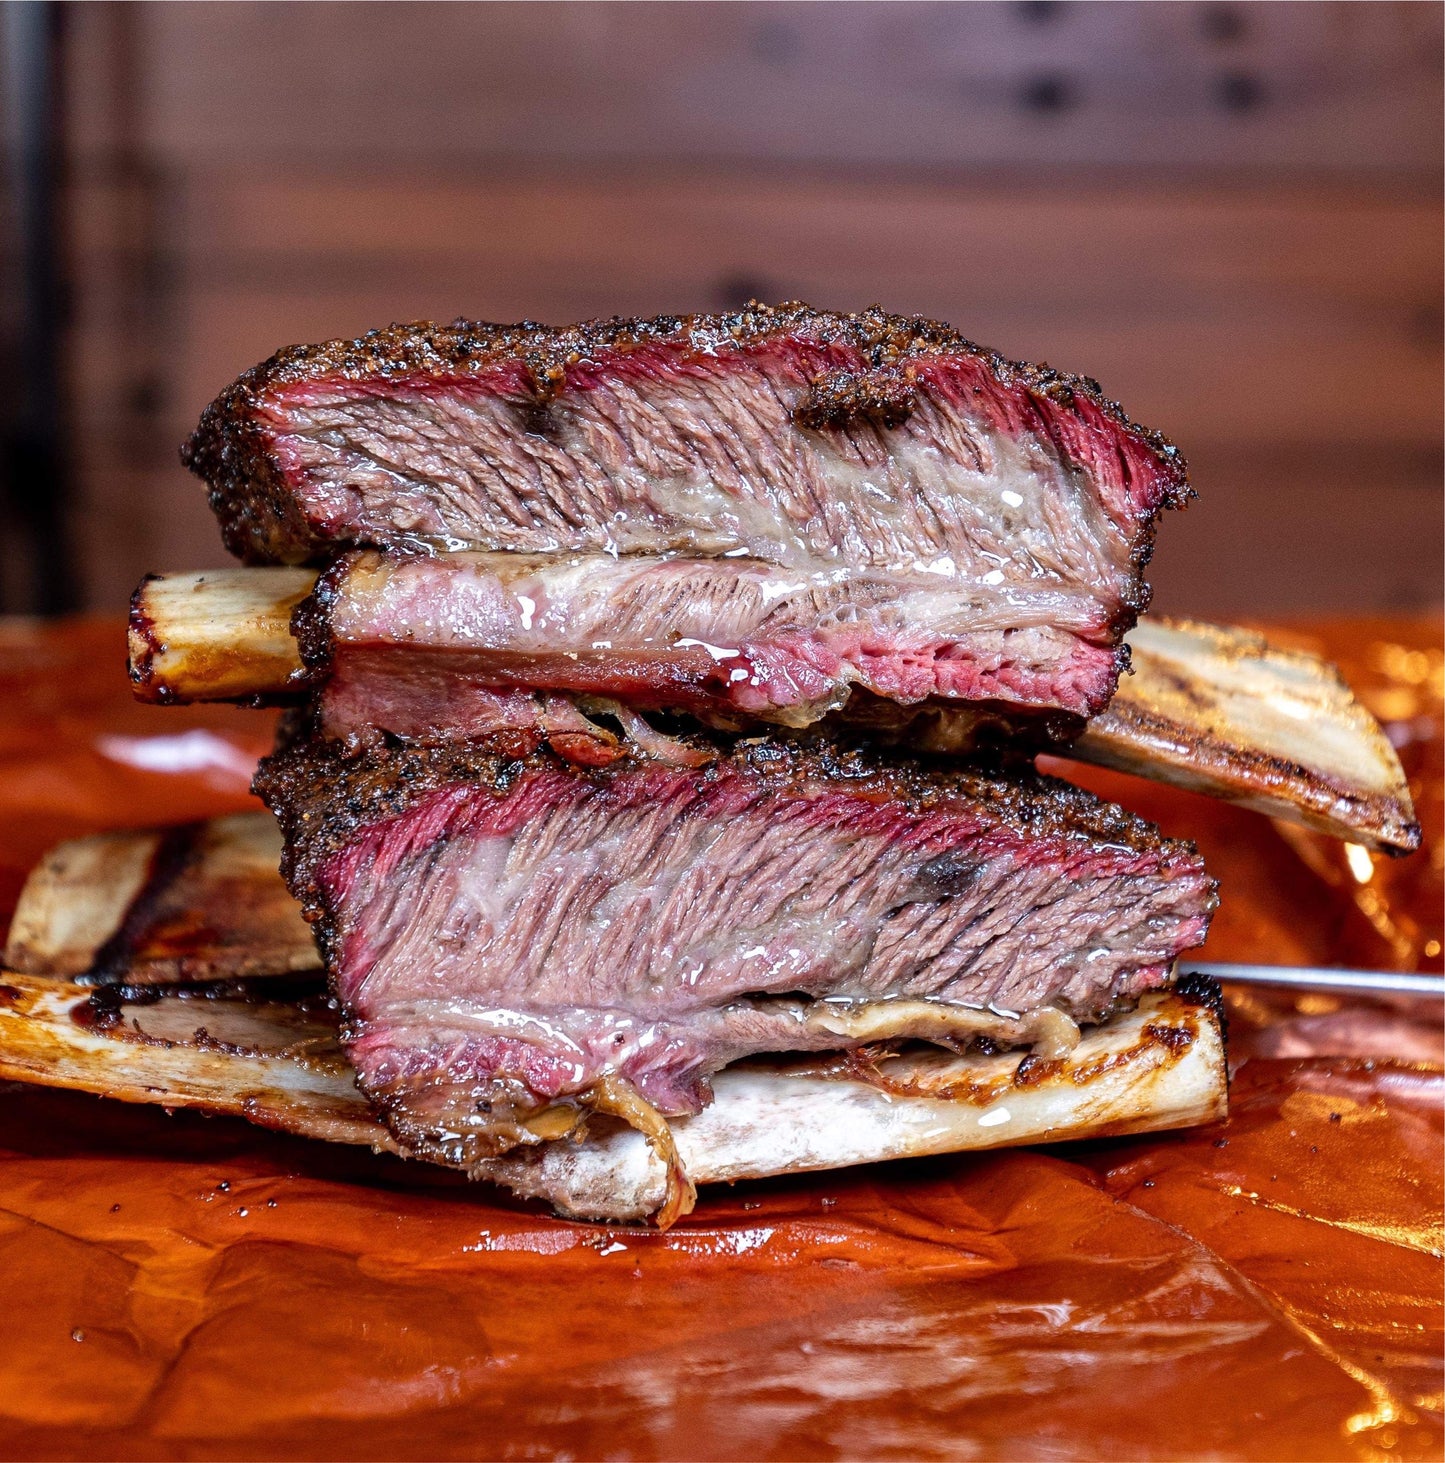 Two beef short ribs stacked on top of each other, with a dark crusty bark coating the meat. The ribs are positioned on a cutting board with a knife resting on the board next to the ribs. The meat appears juicy and tender, with visible marbling throughout.